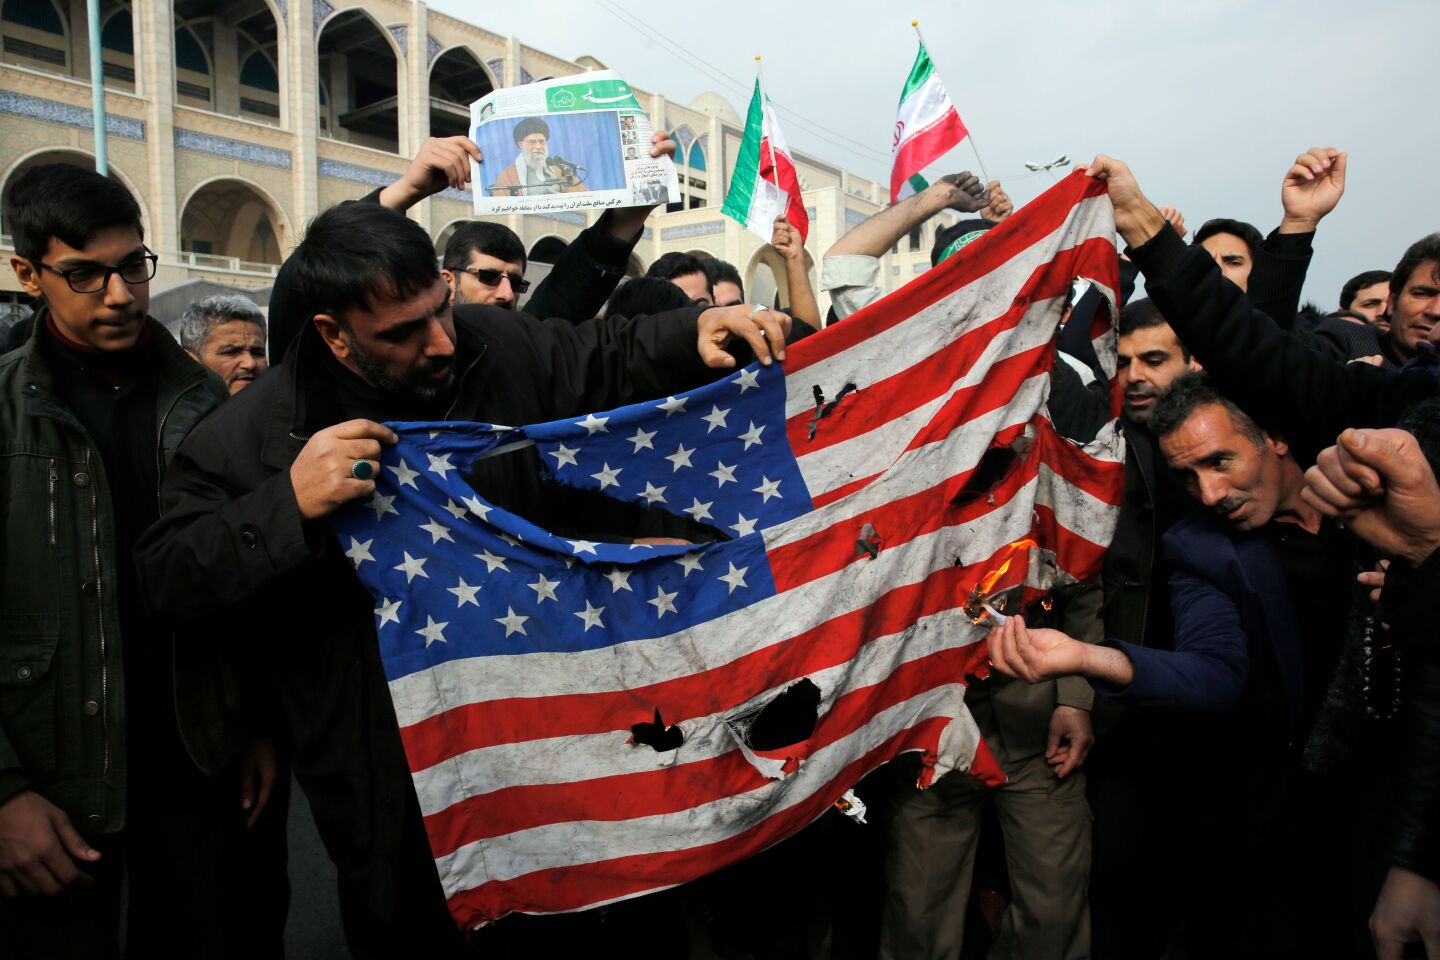 Iranians burn a U.S. flag during a protest in Tehran to condemn Suleimani's killing.